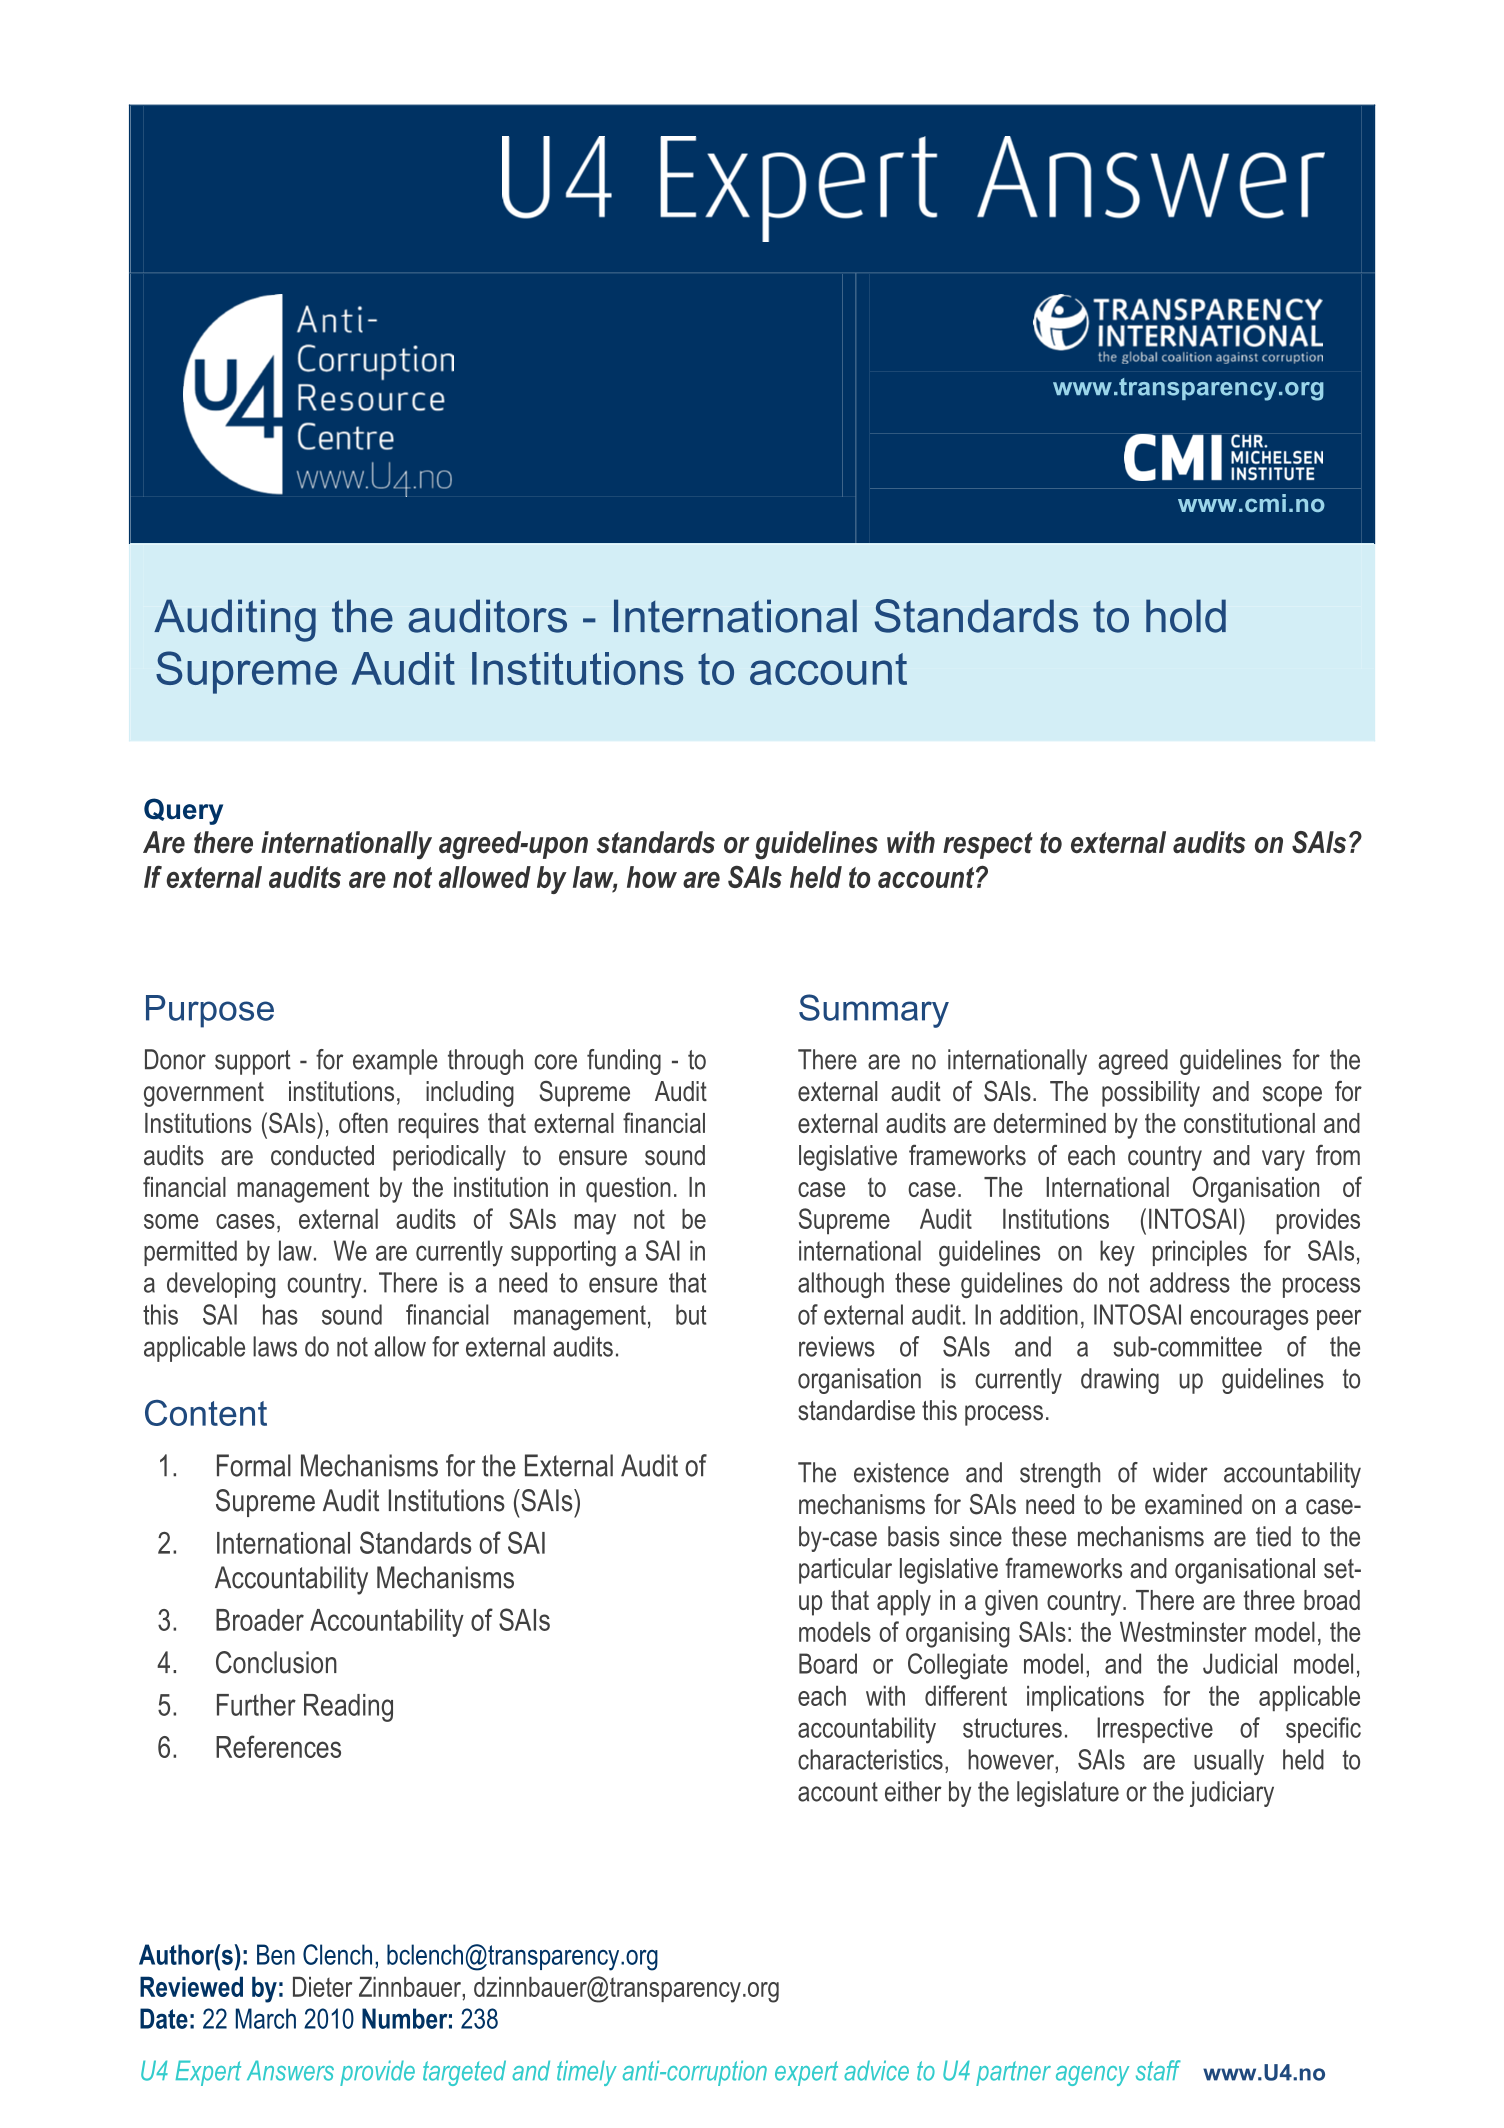 Auditing the auditors - International Standards to hold Supreme Audit Institutions to account